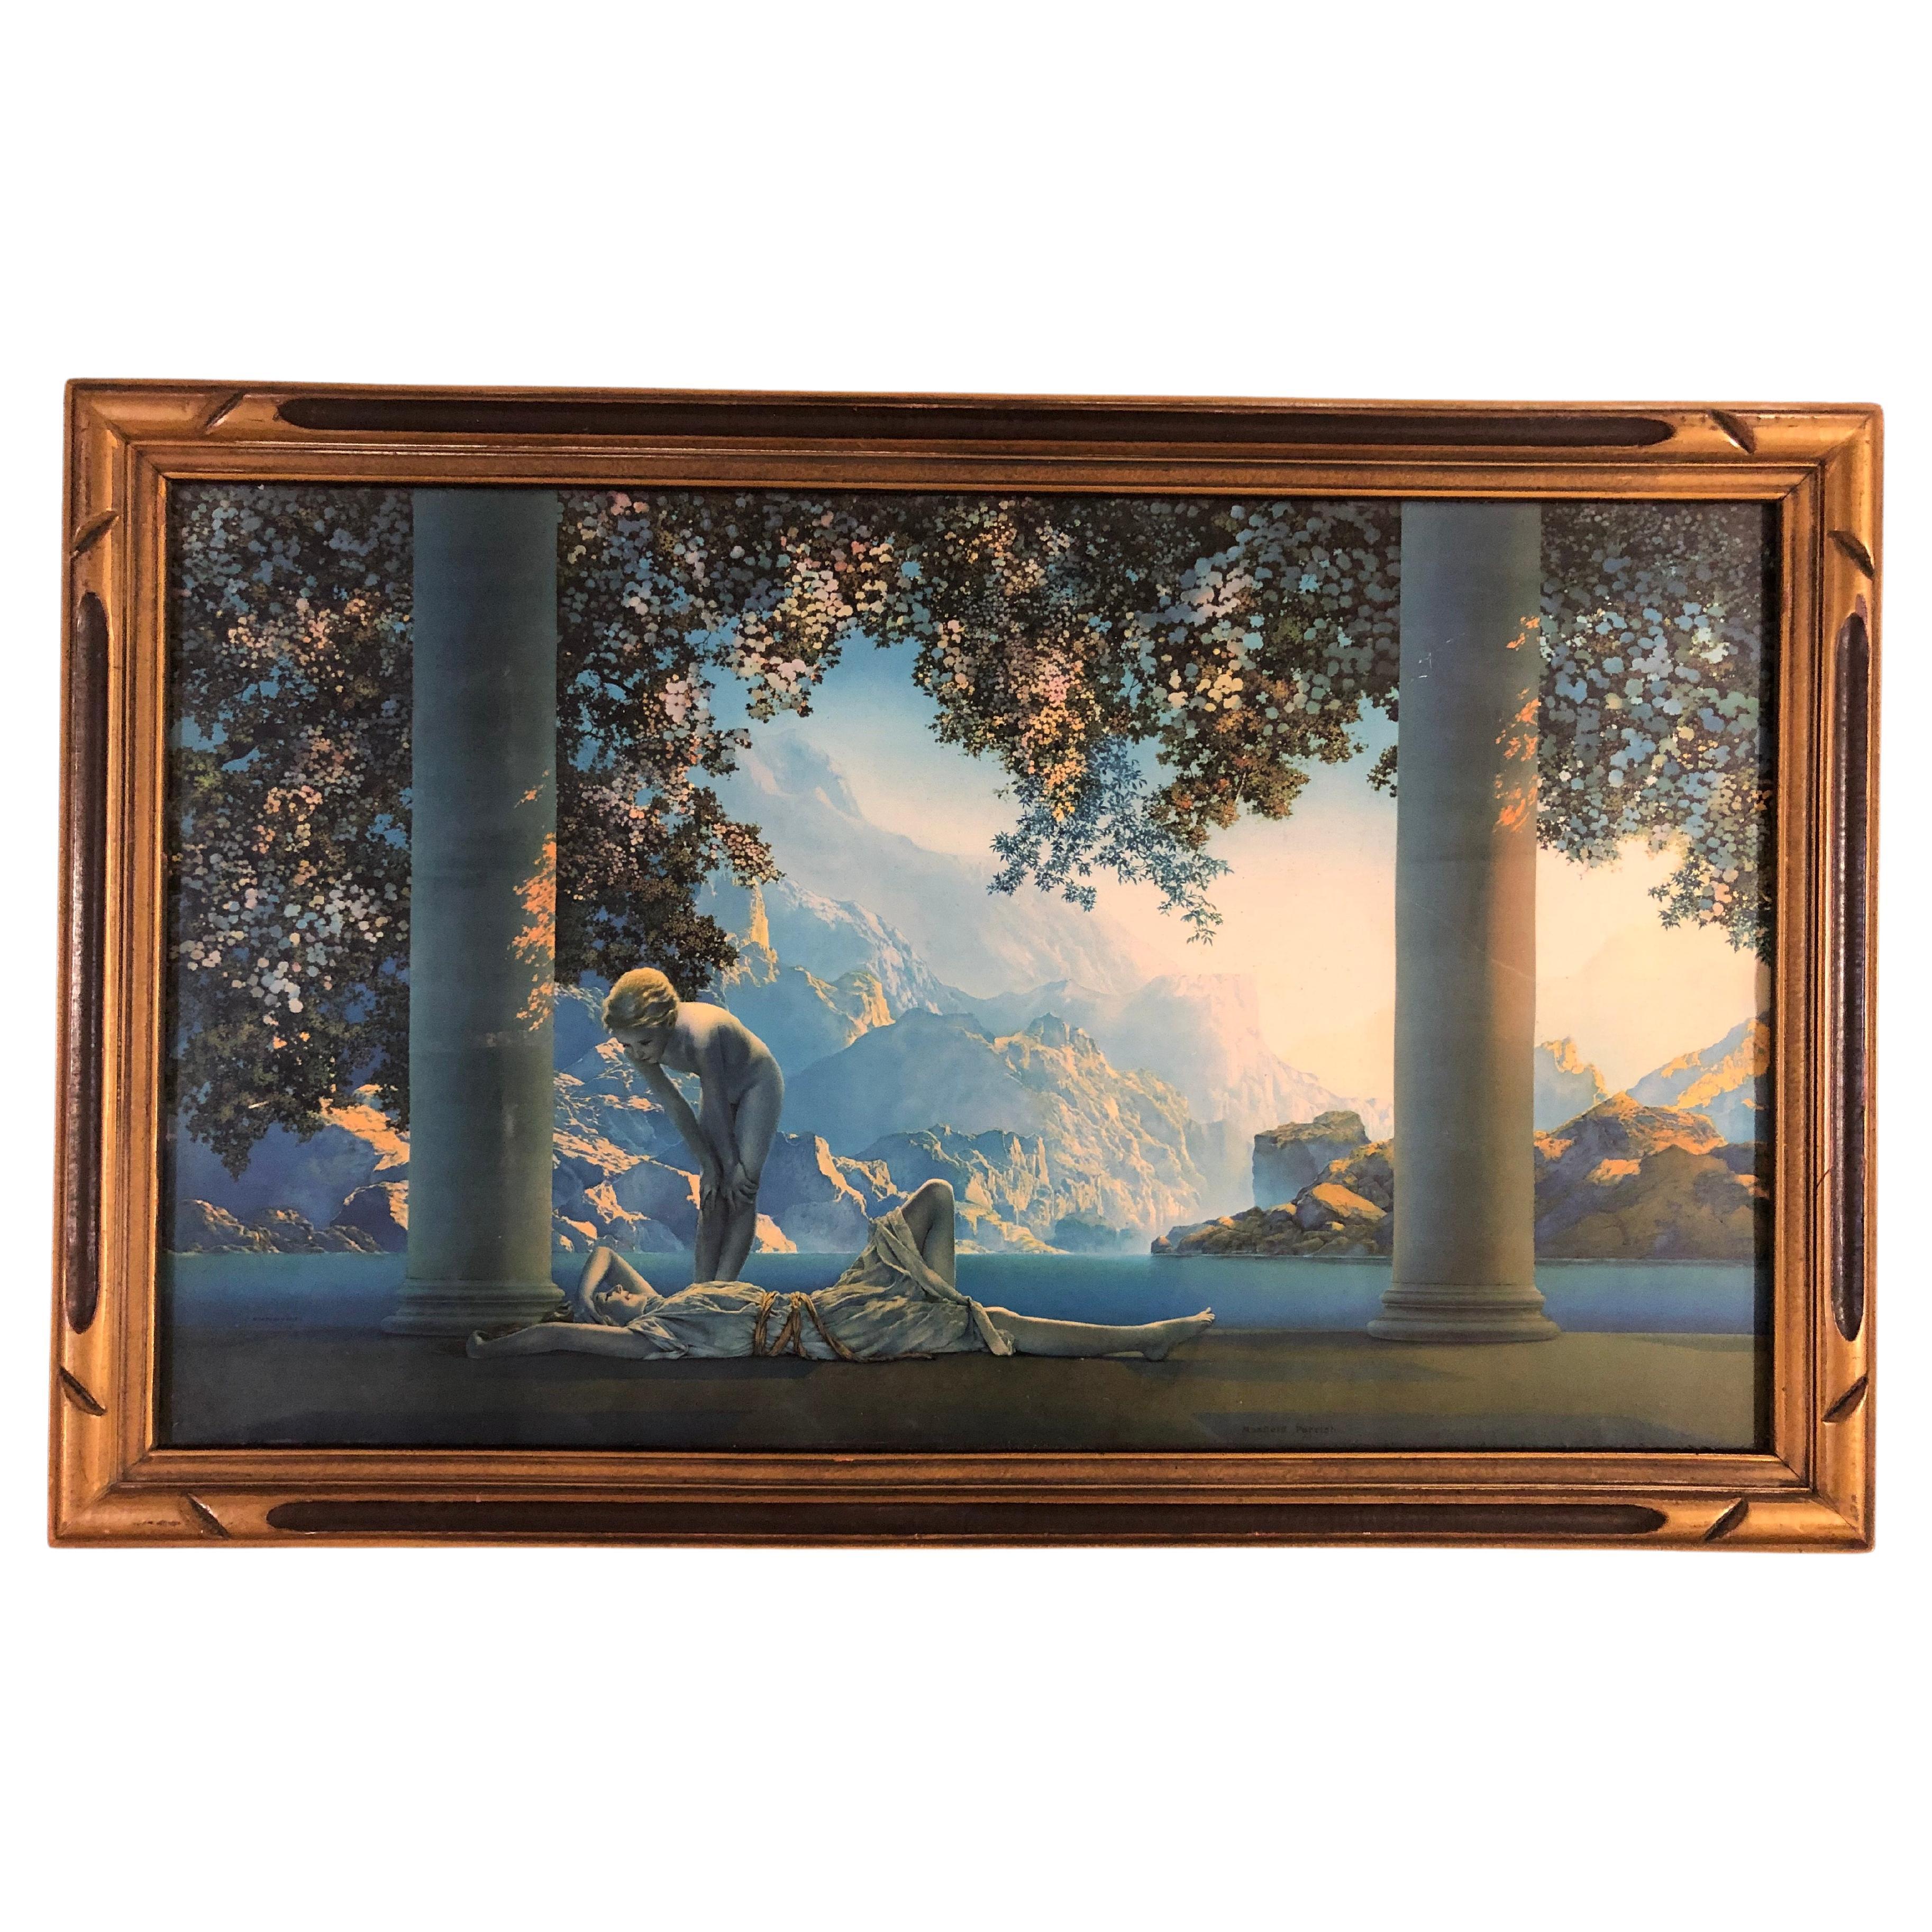 1920s Maxfield Parrish "Daybreak" Figurative Lithograph Print in Wood Frame